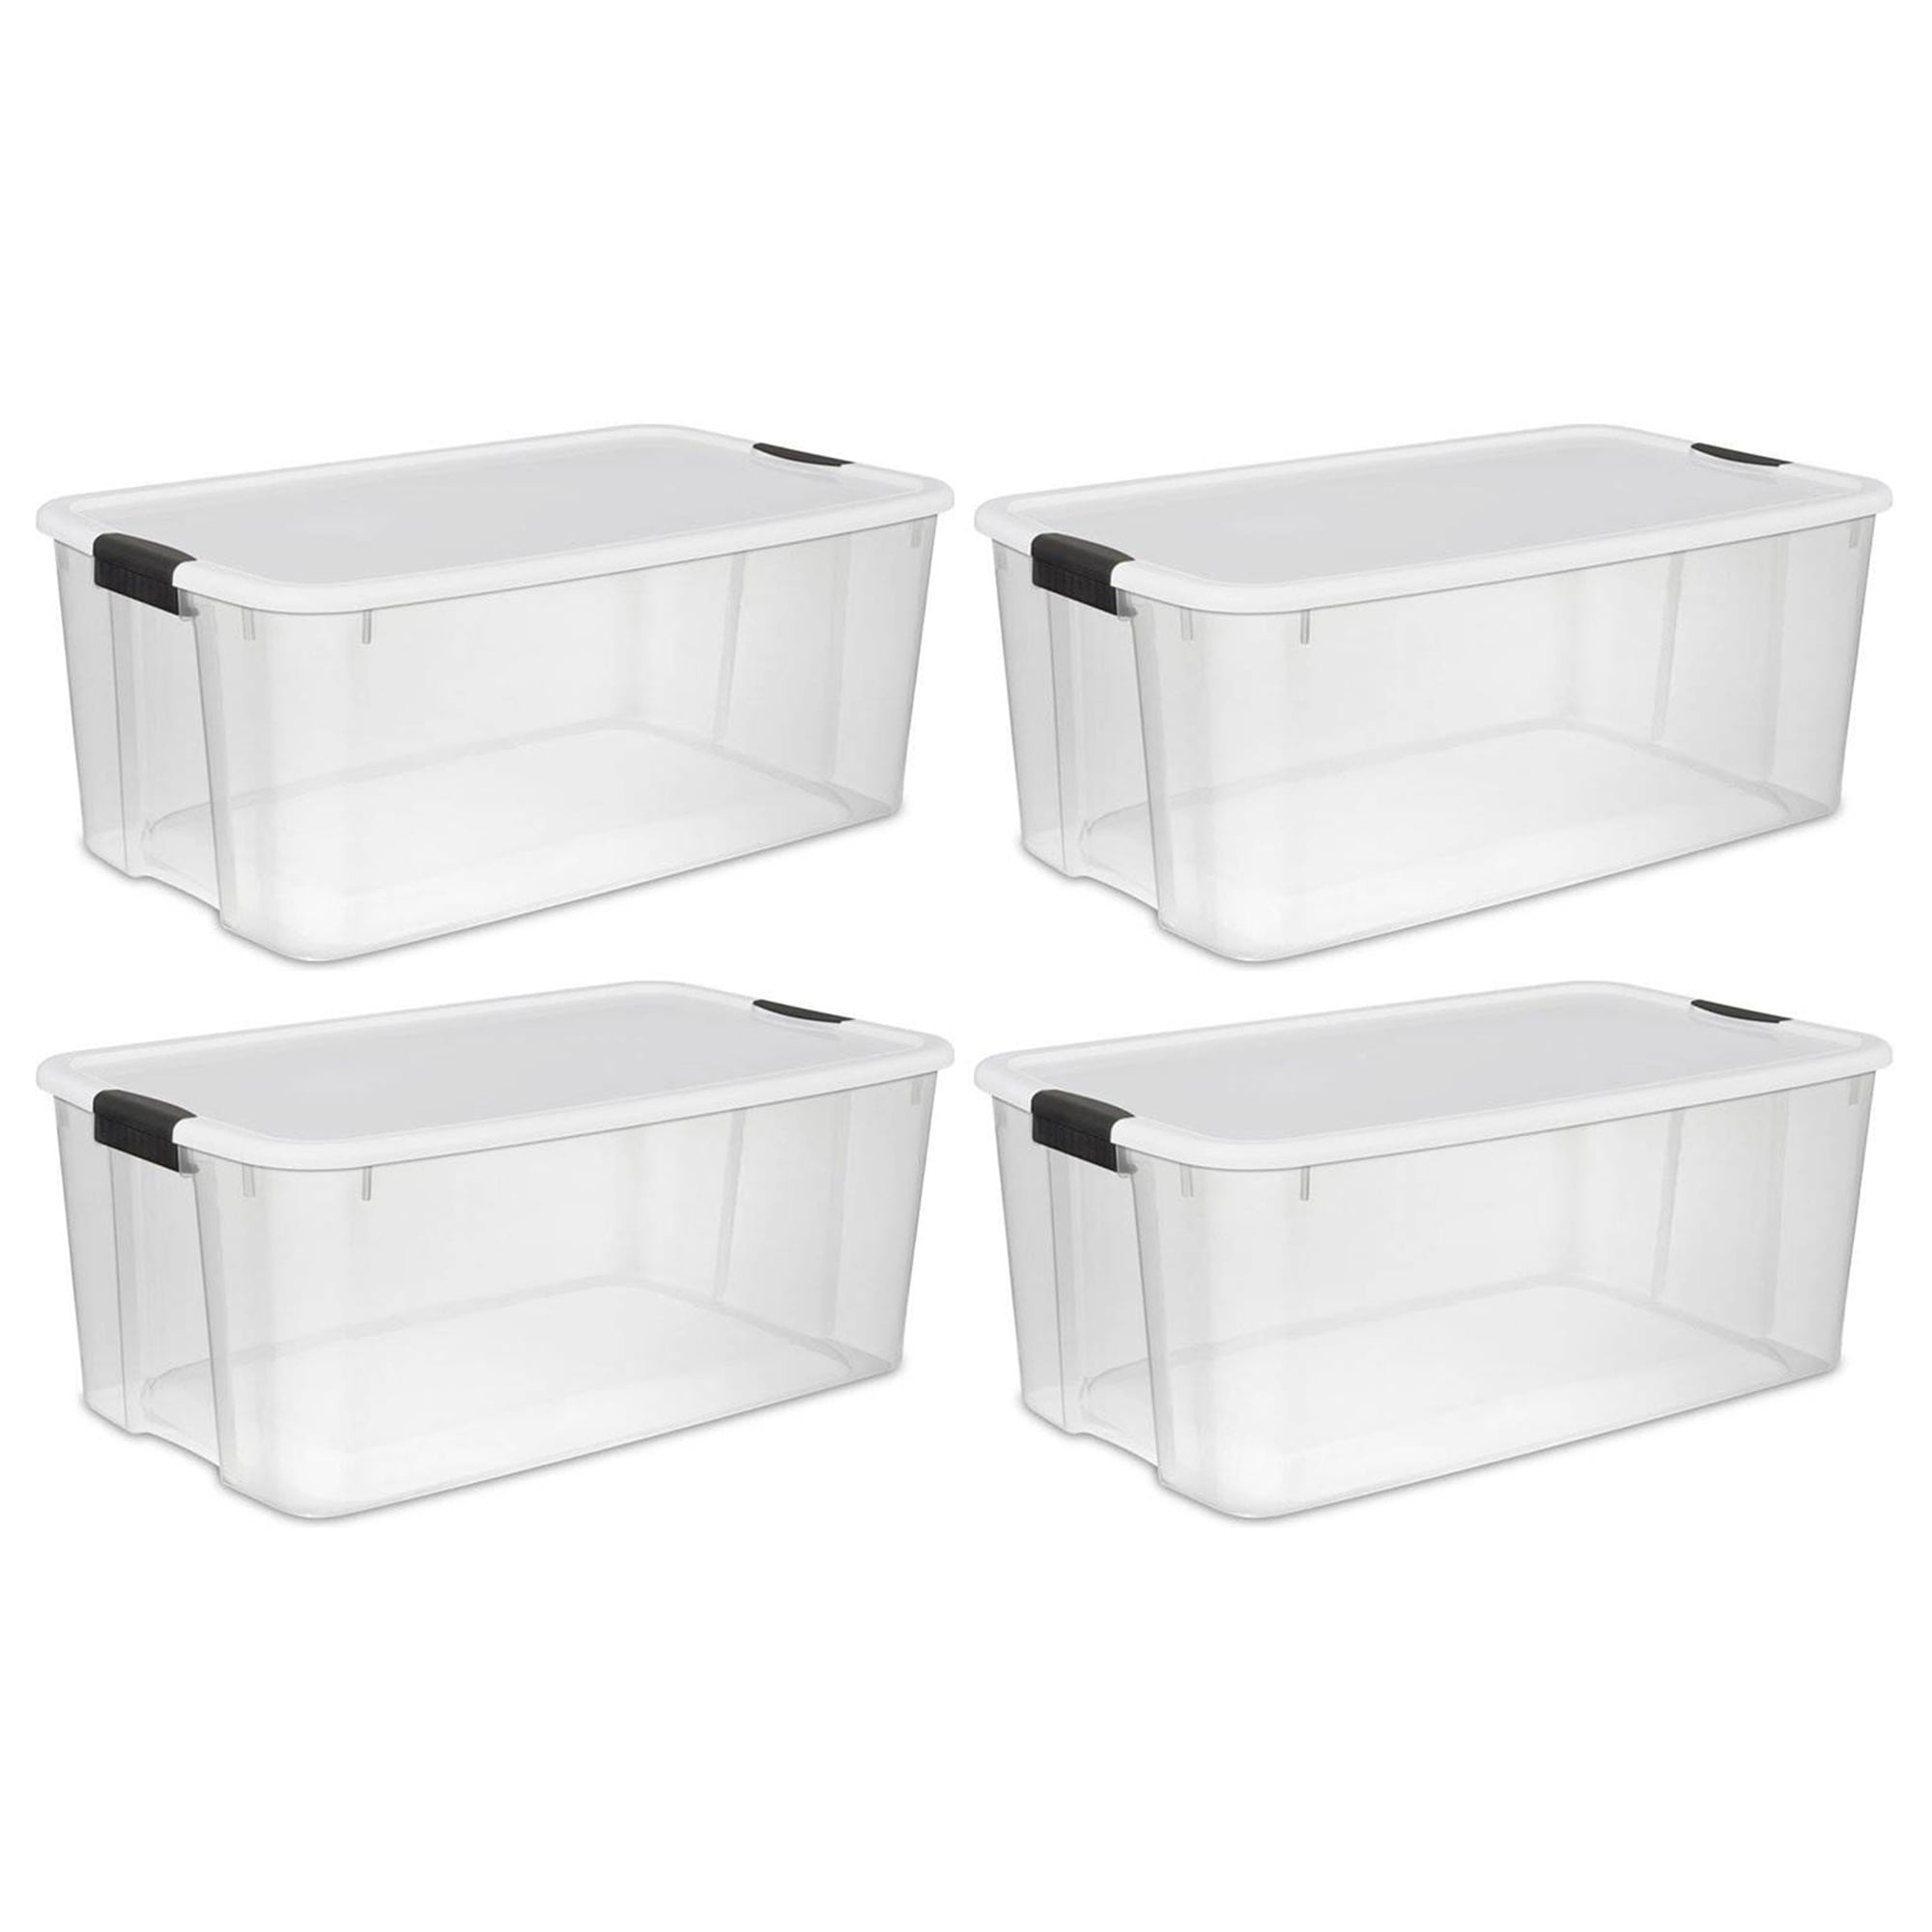 Sterilite 03121606 4-1/2 Cup Rectangular Leaf Accents Container